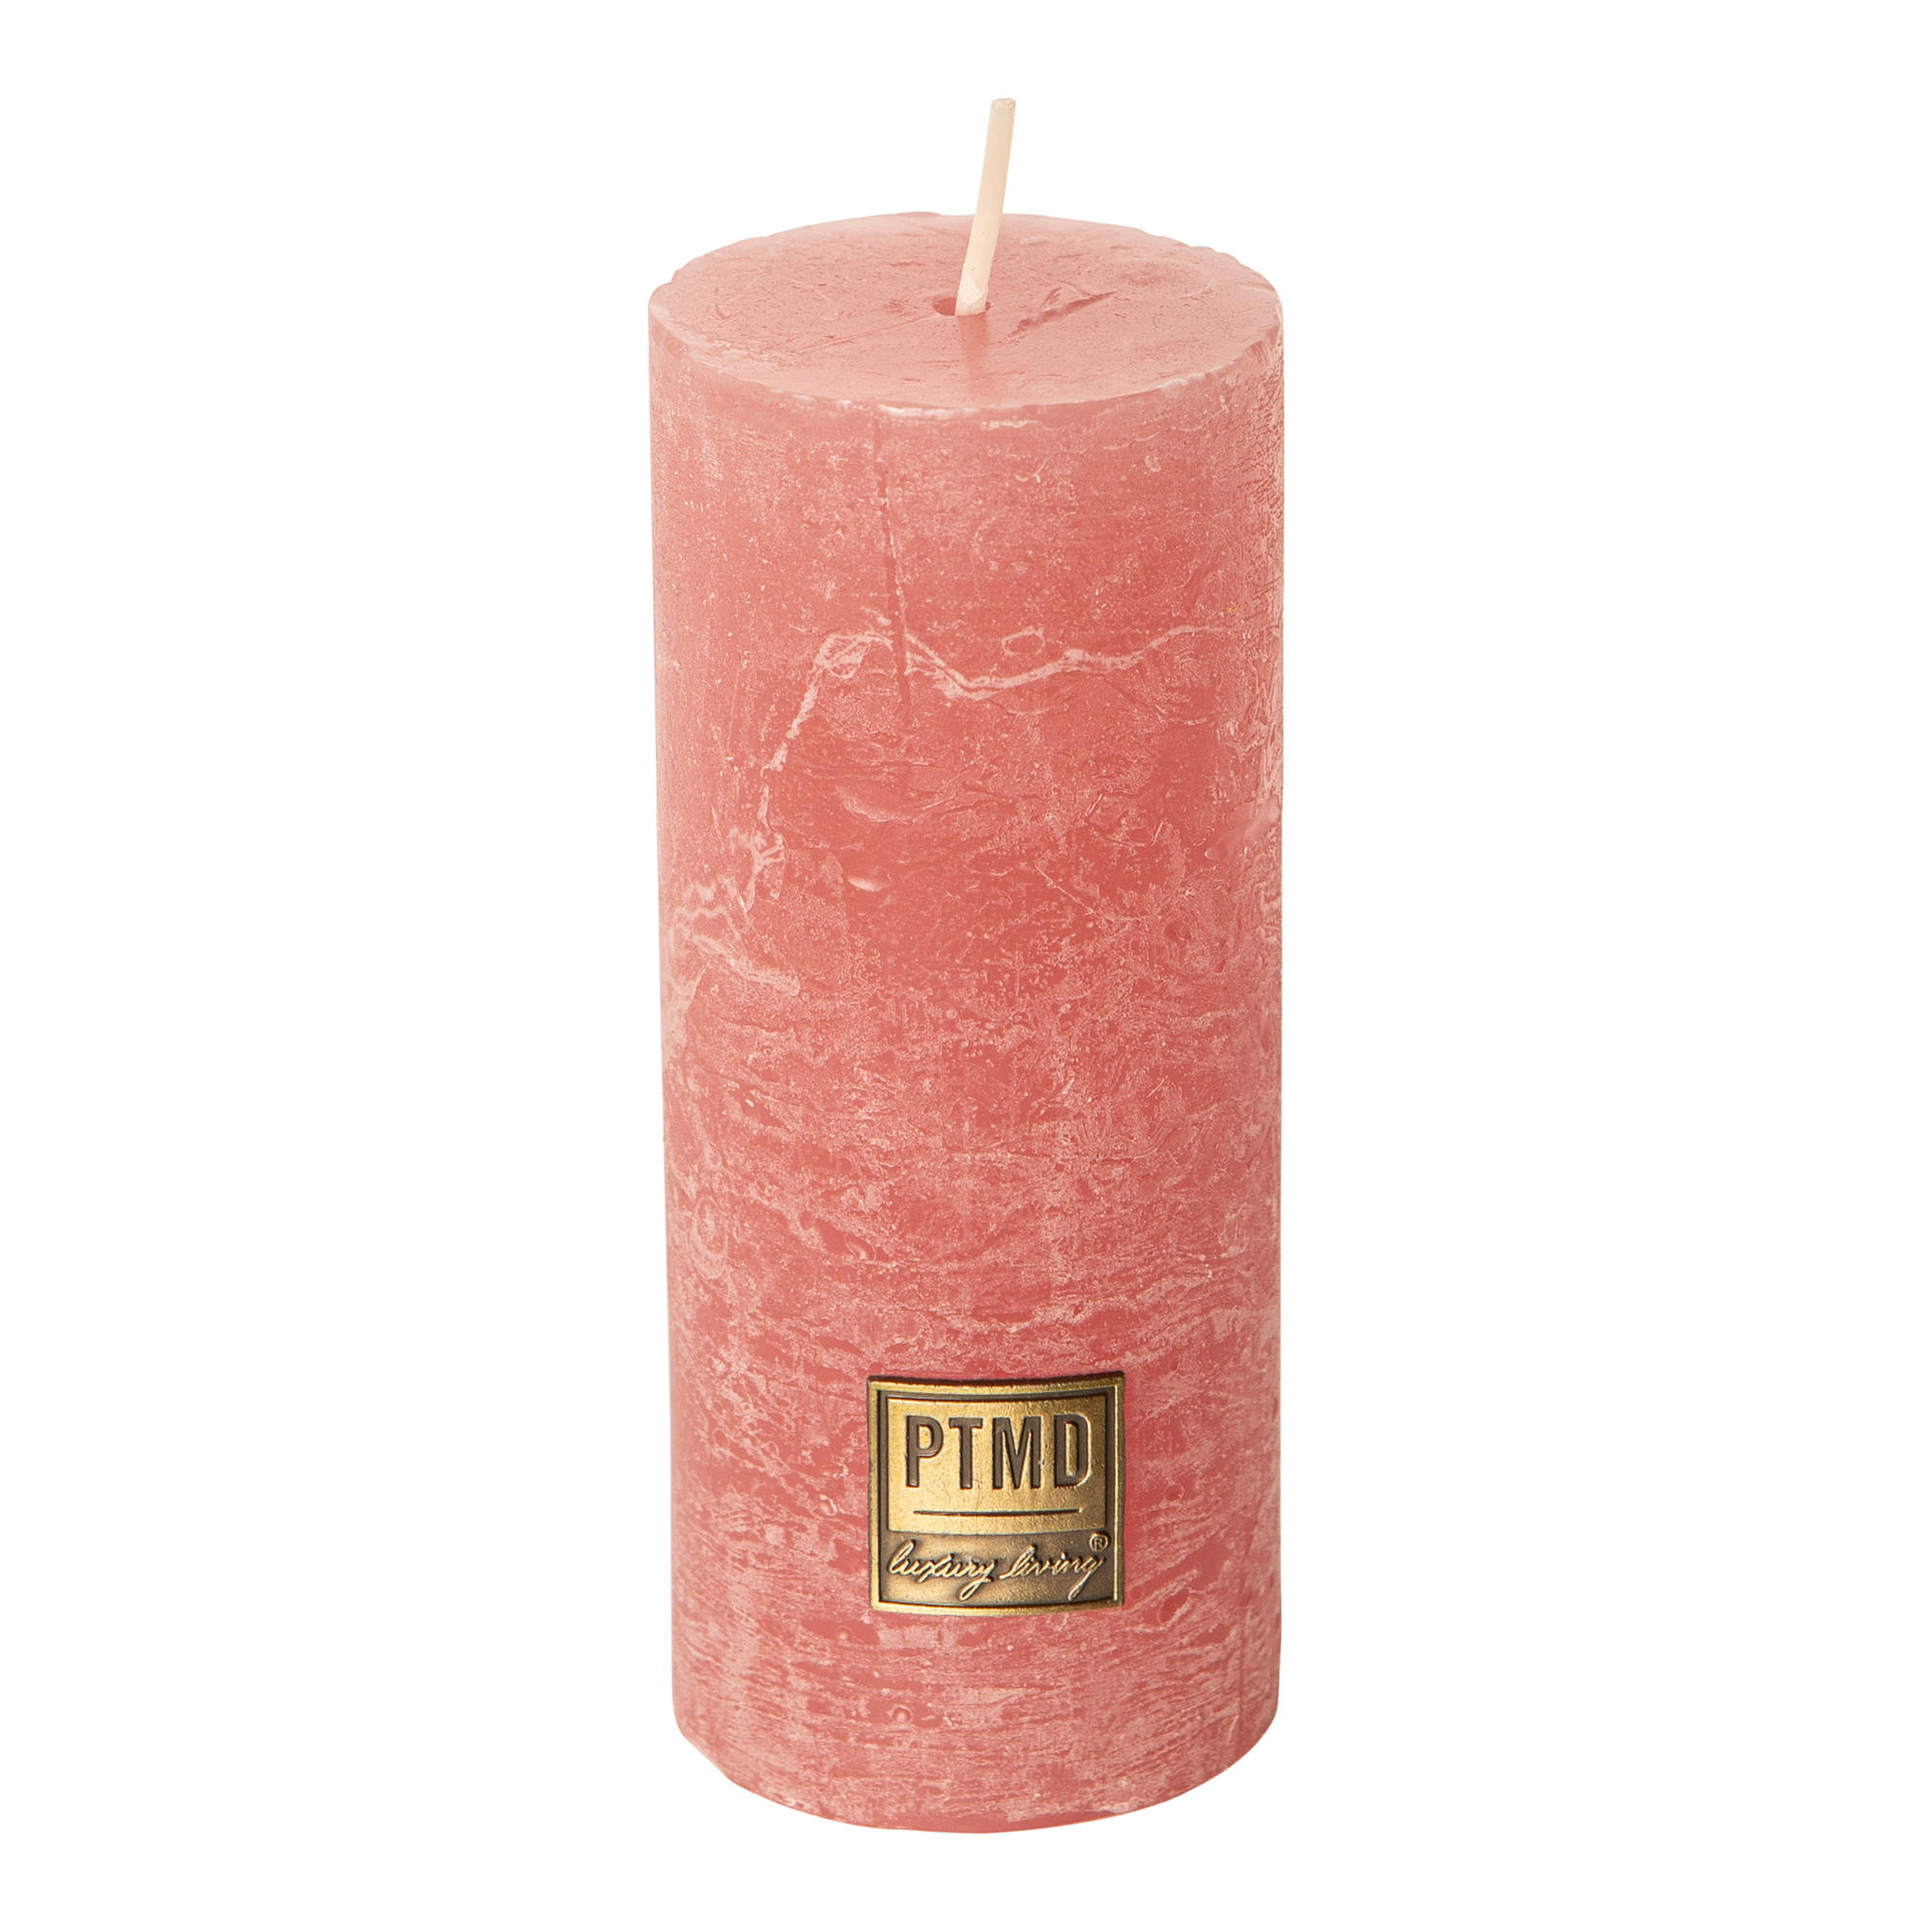 ptmd-10-x-7cm-blush-pink-rustic-pillar-candle